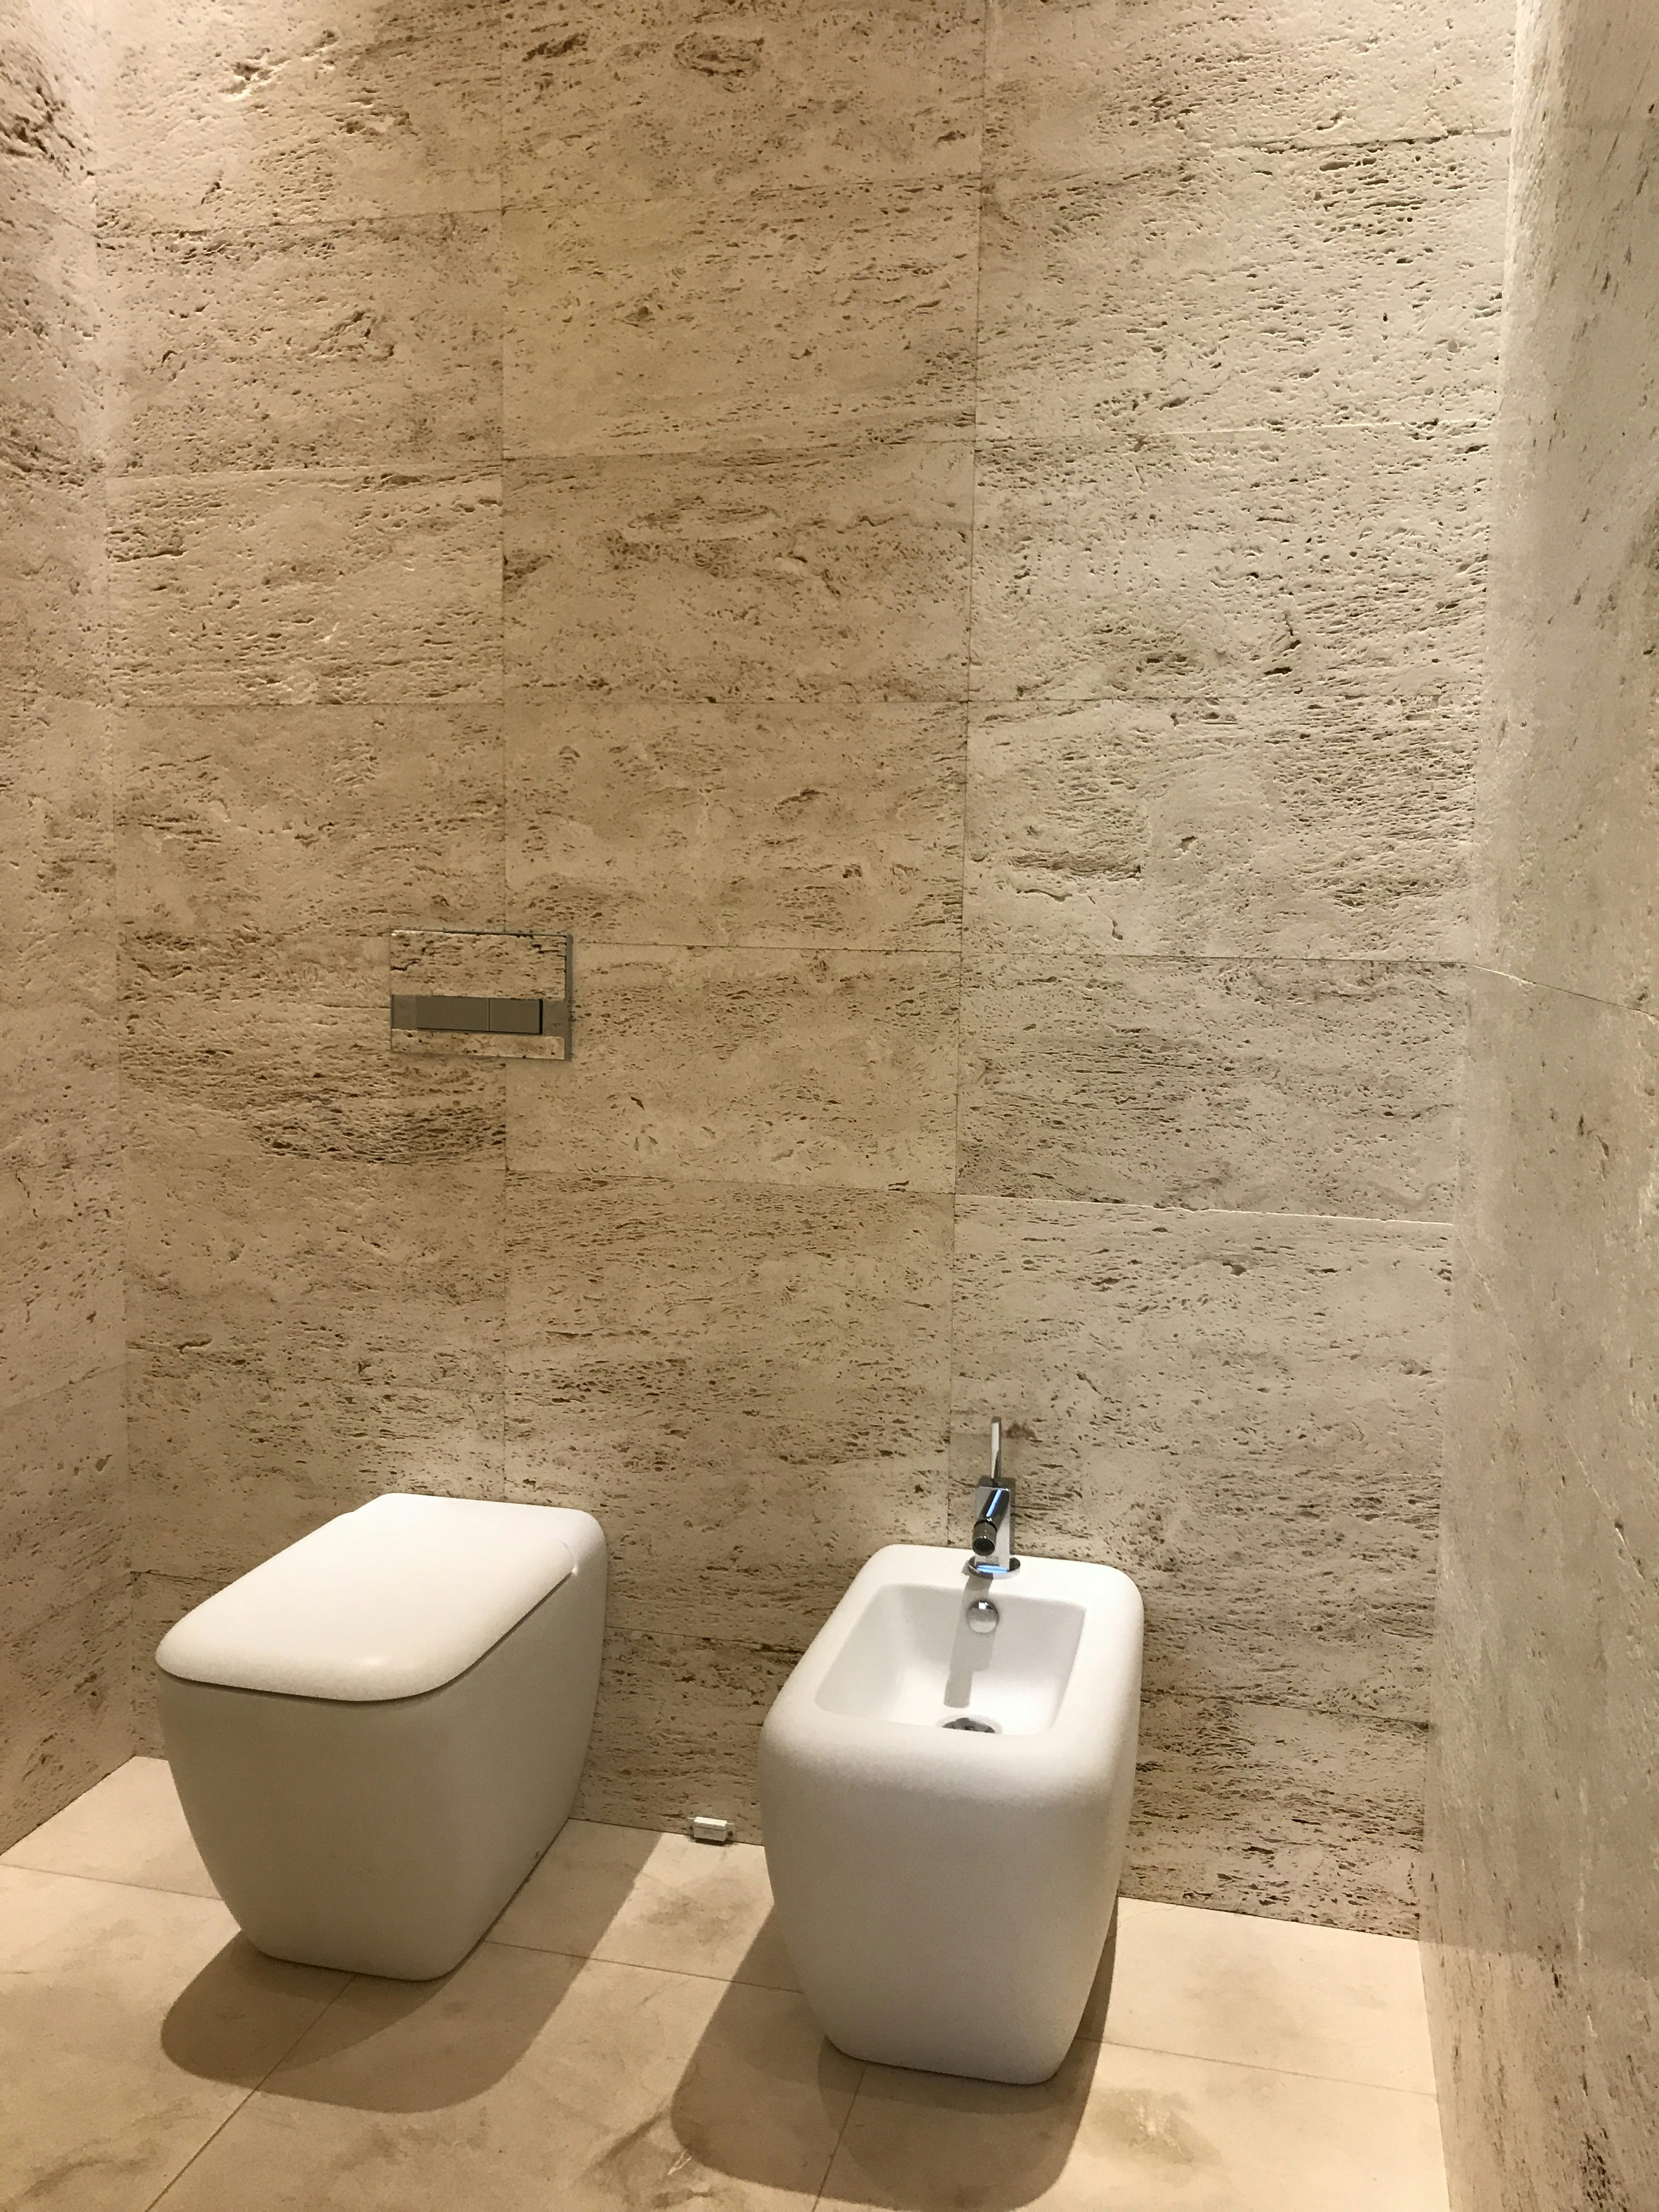 A modern bathroom with an integrated bidet and dryer toilet seat